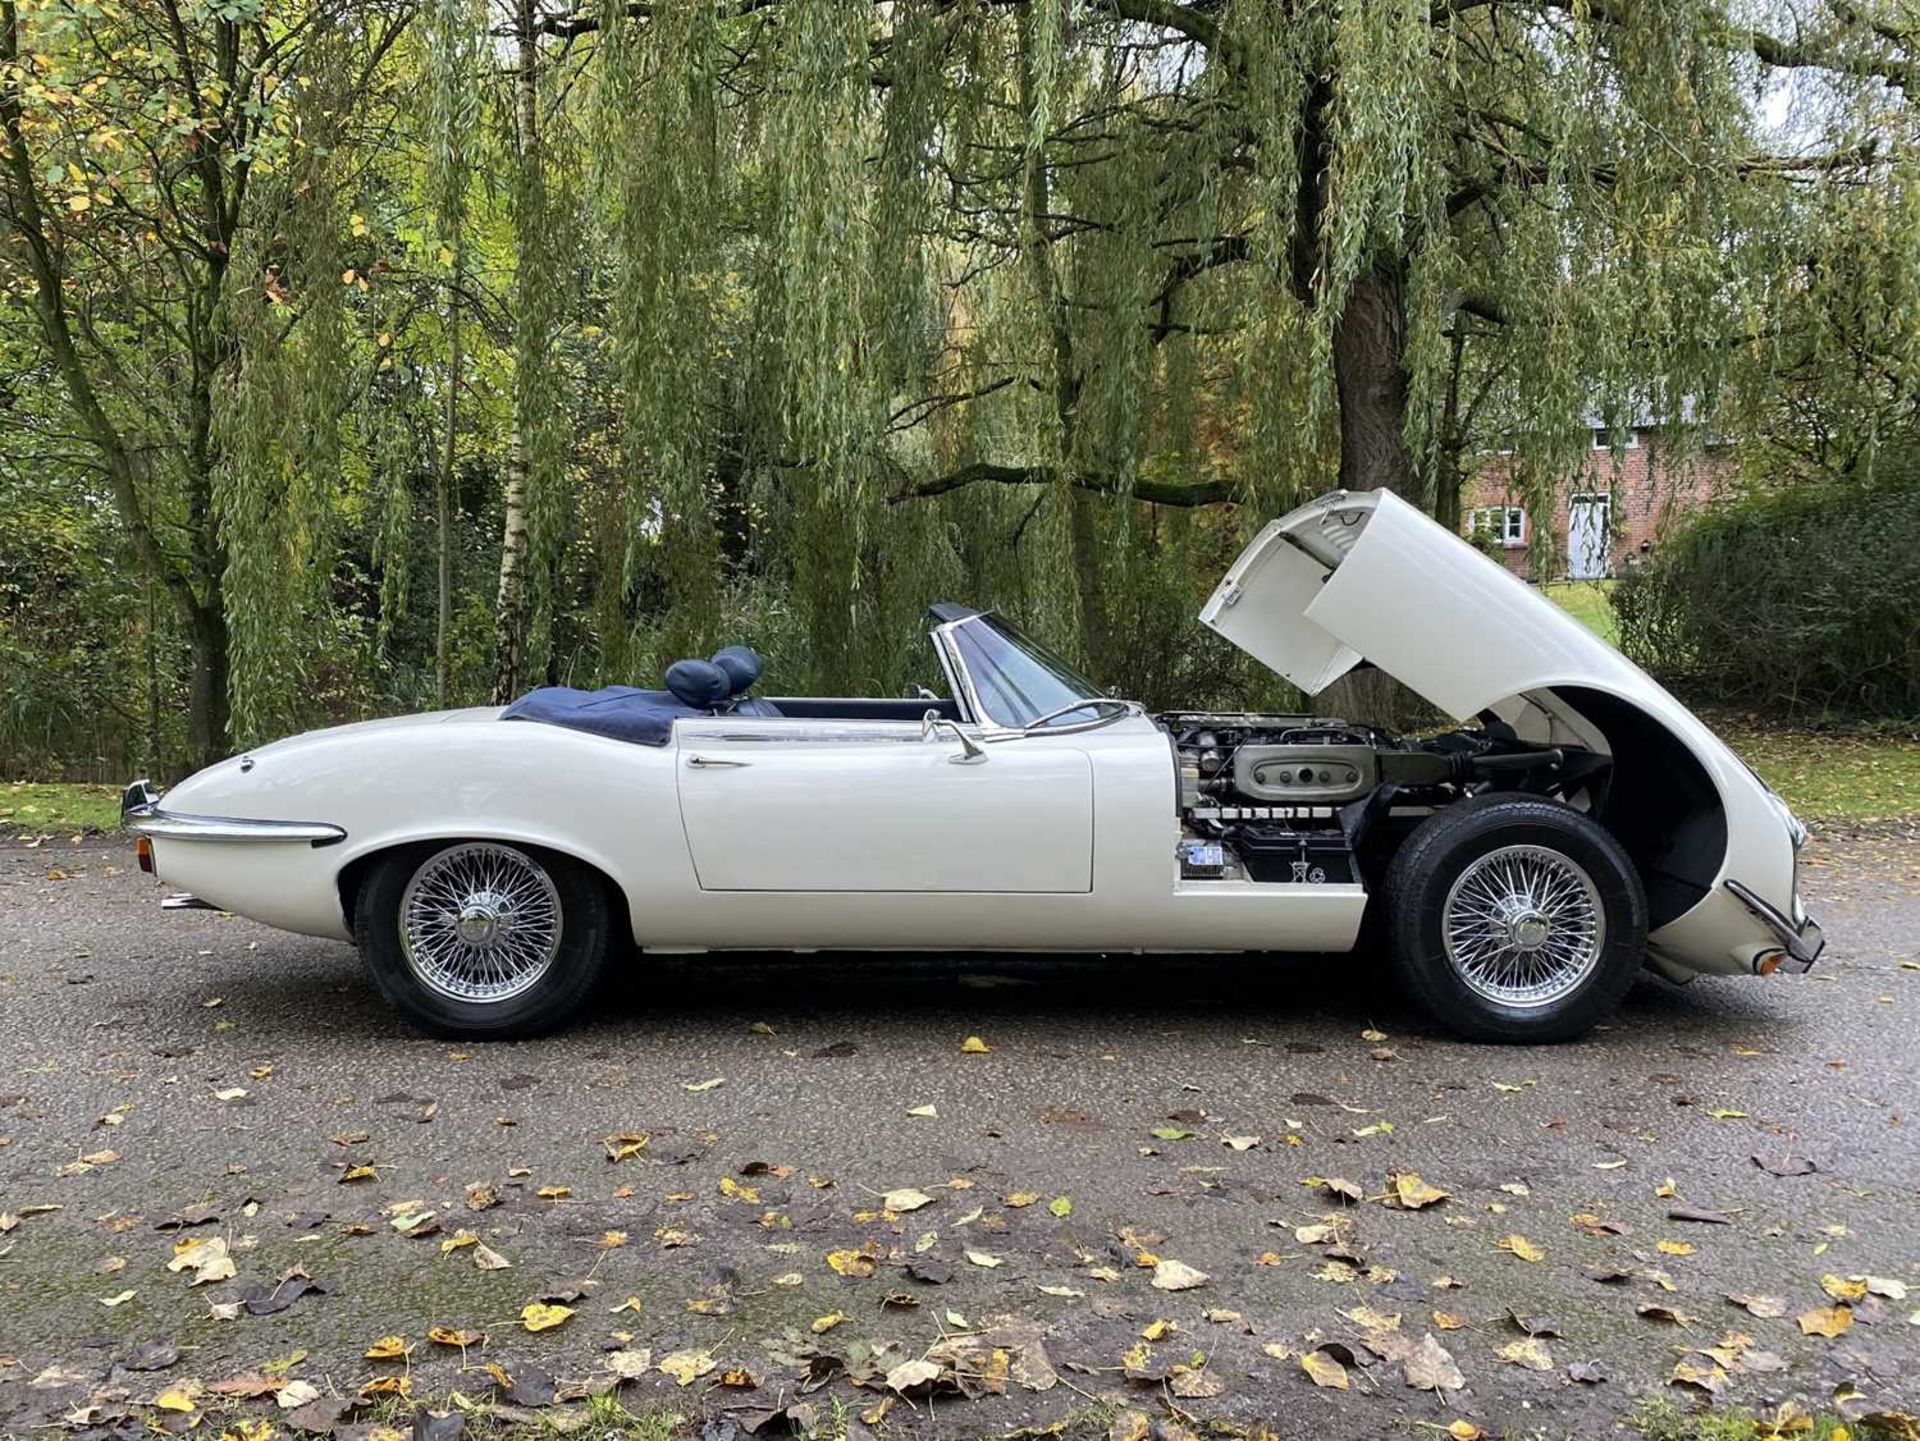 1973 Jaguar E-Type V12 Roadster As seen in Only Fools and Horses - Image 23 of 105